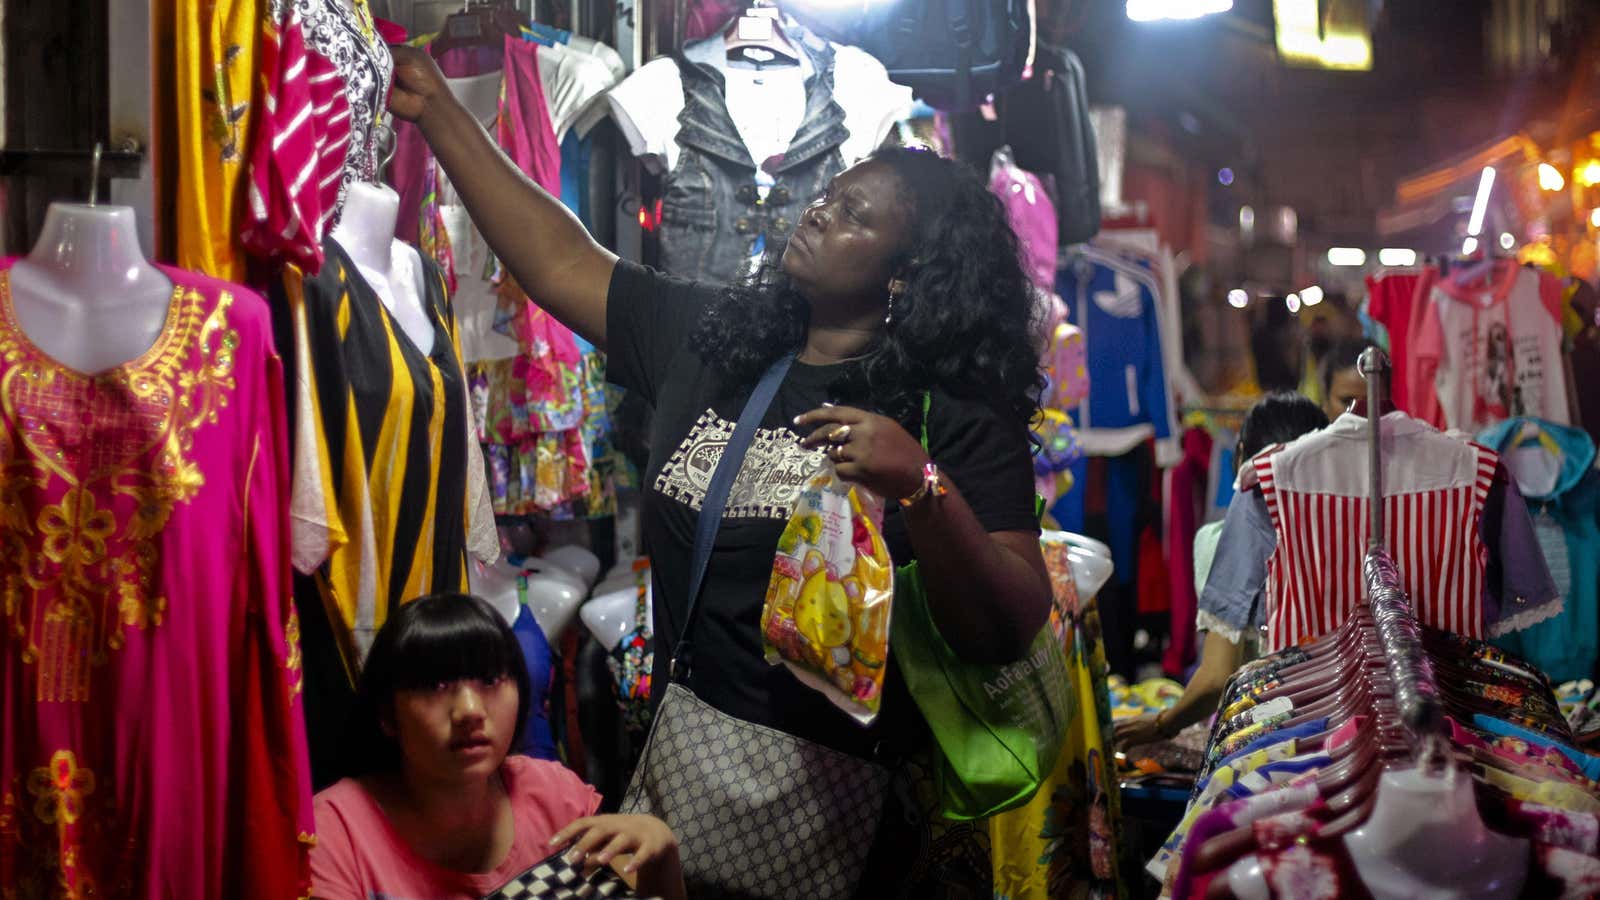 An African woman shops at a market at “African village” in Guangzhou, Guangdong province